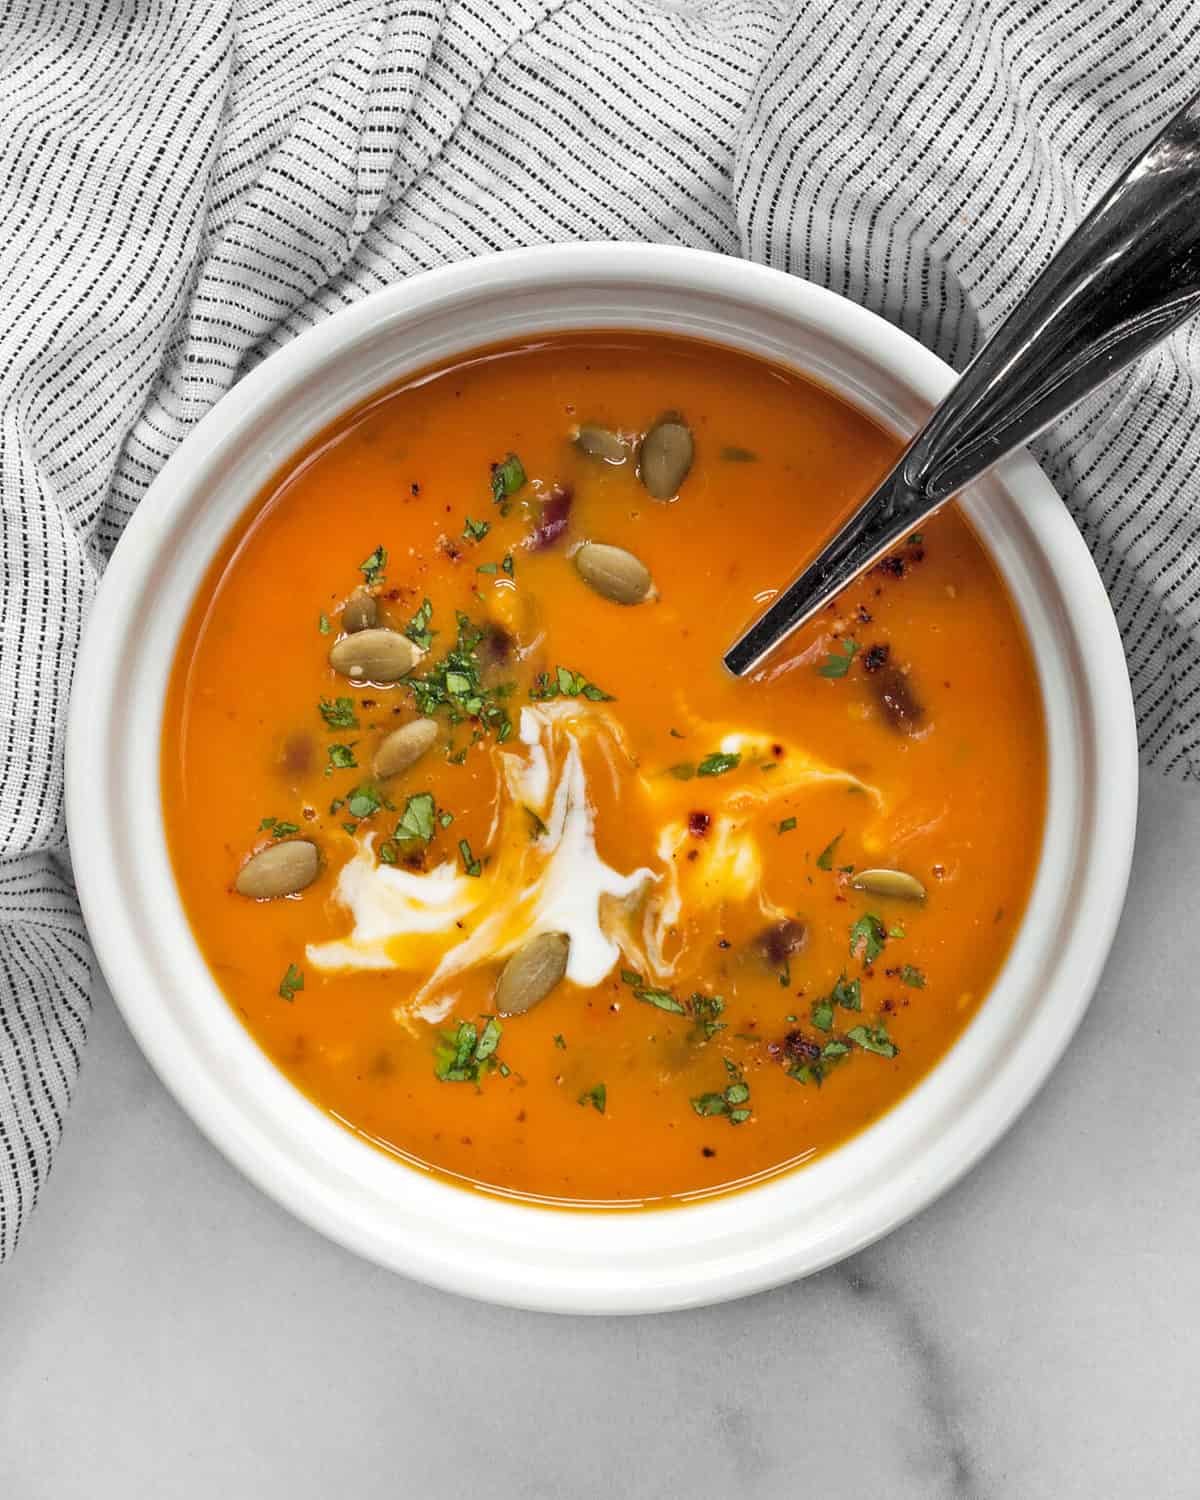 Spicy Butternut Squash Soup with Black Beans | Last Ingredient